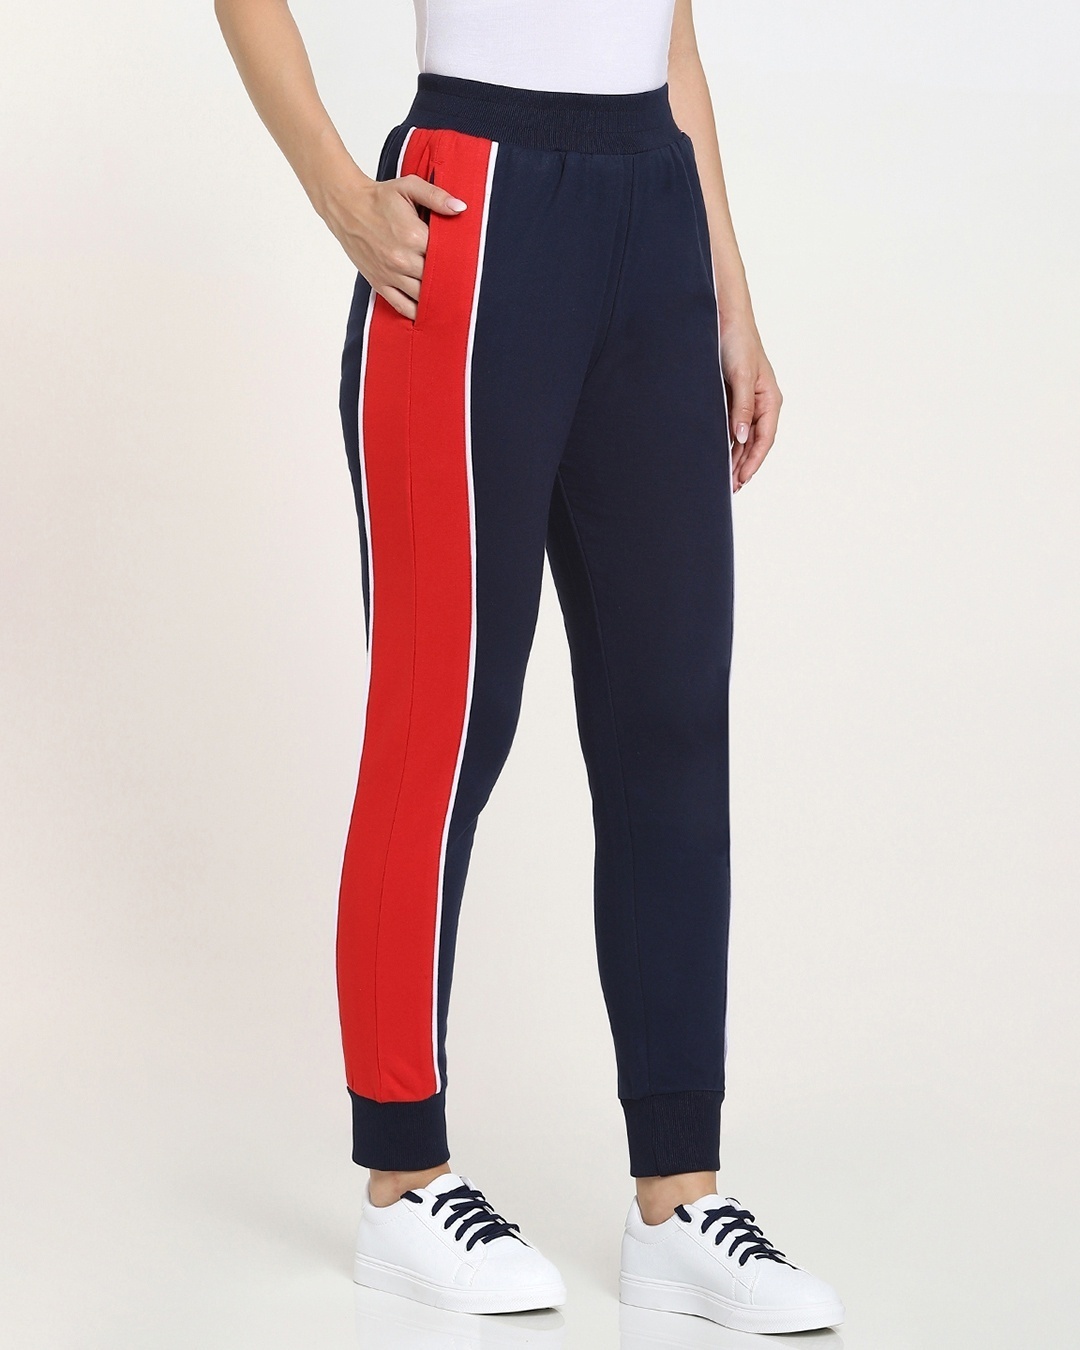 Shop Navy Blue-High Risk Red WINO Fashion Color Block Joggers AW 21-Back